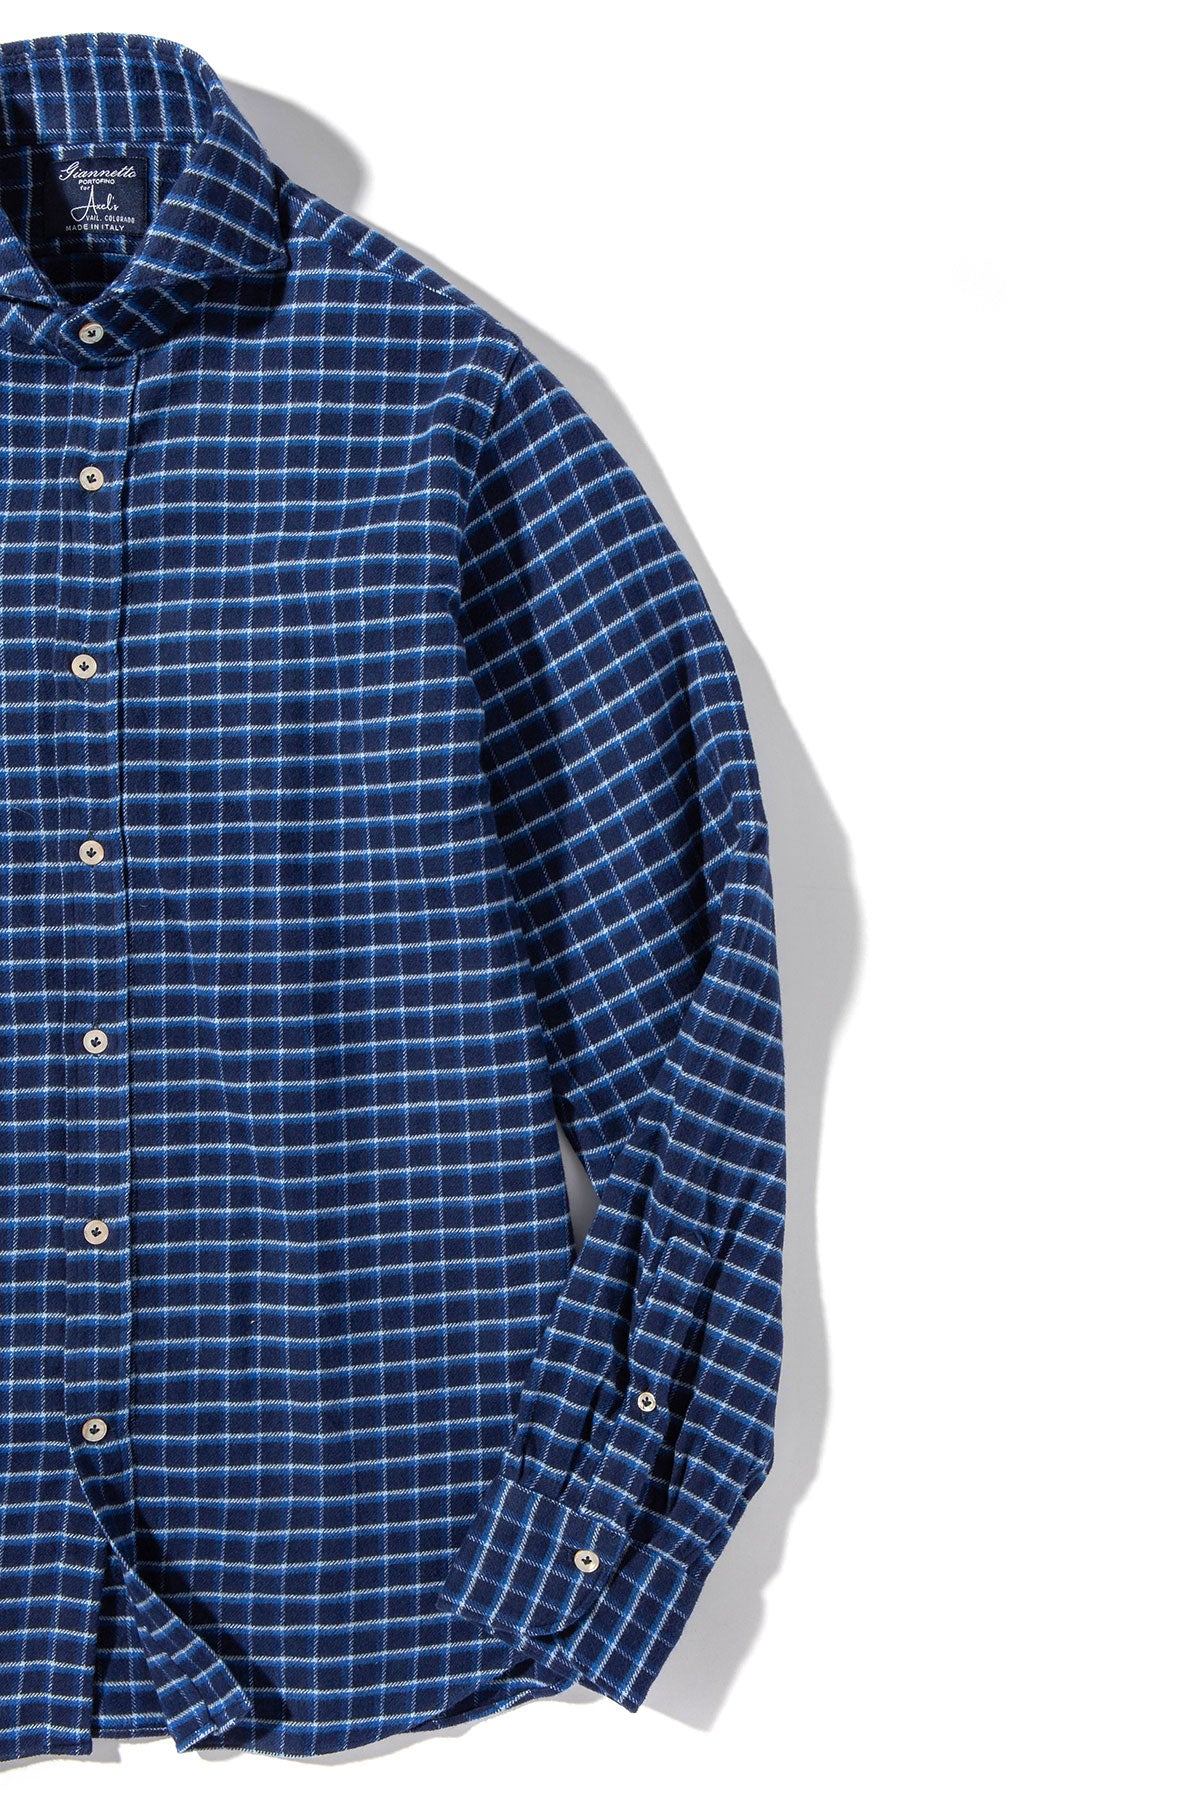 Alvord Cotton Flannel in Navy and White | Mens - Shirts | Axels GP